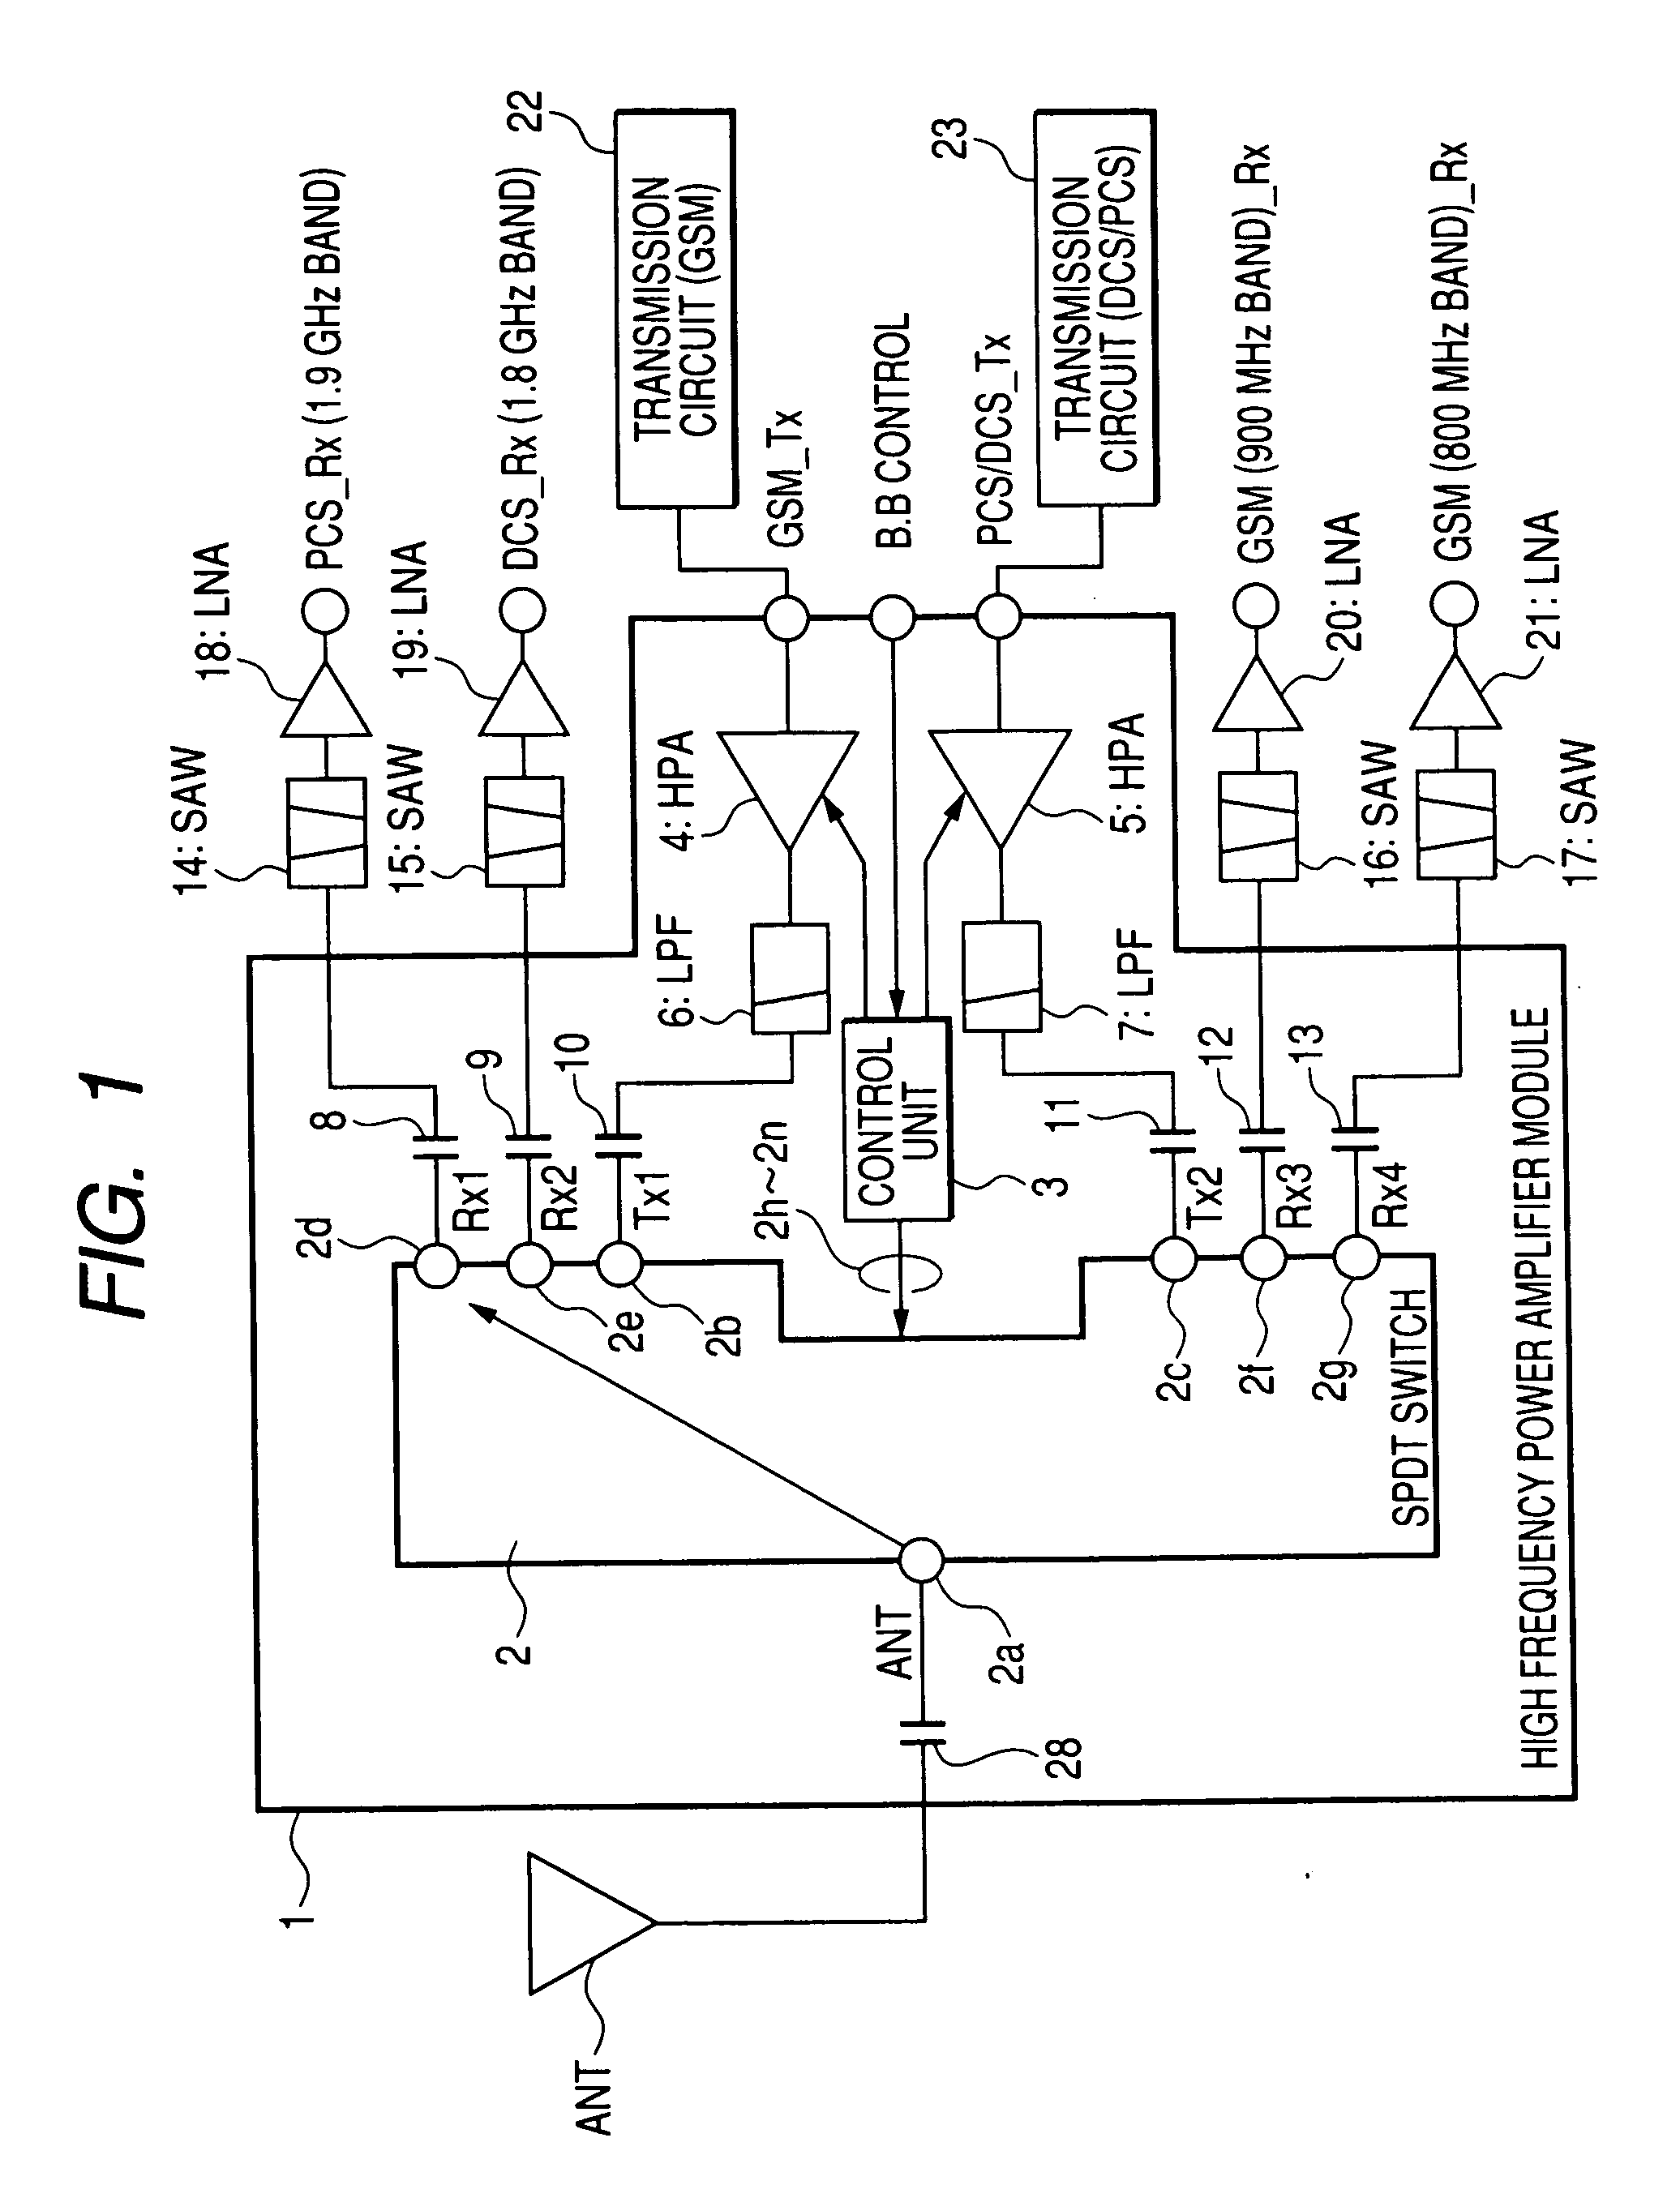 Semiconductor integrated circuit device and high frequency power ampifier module